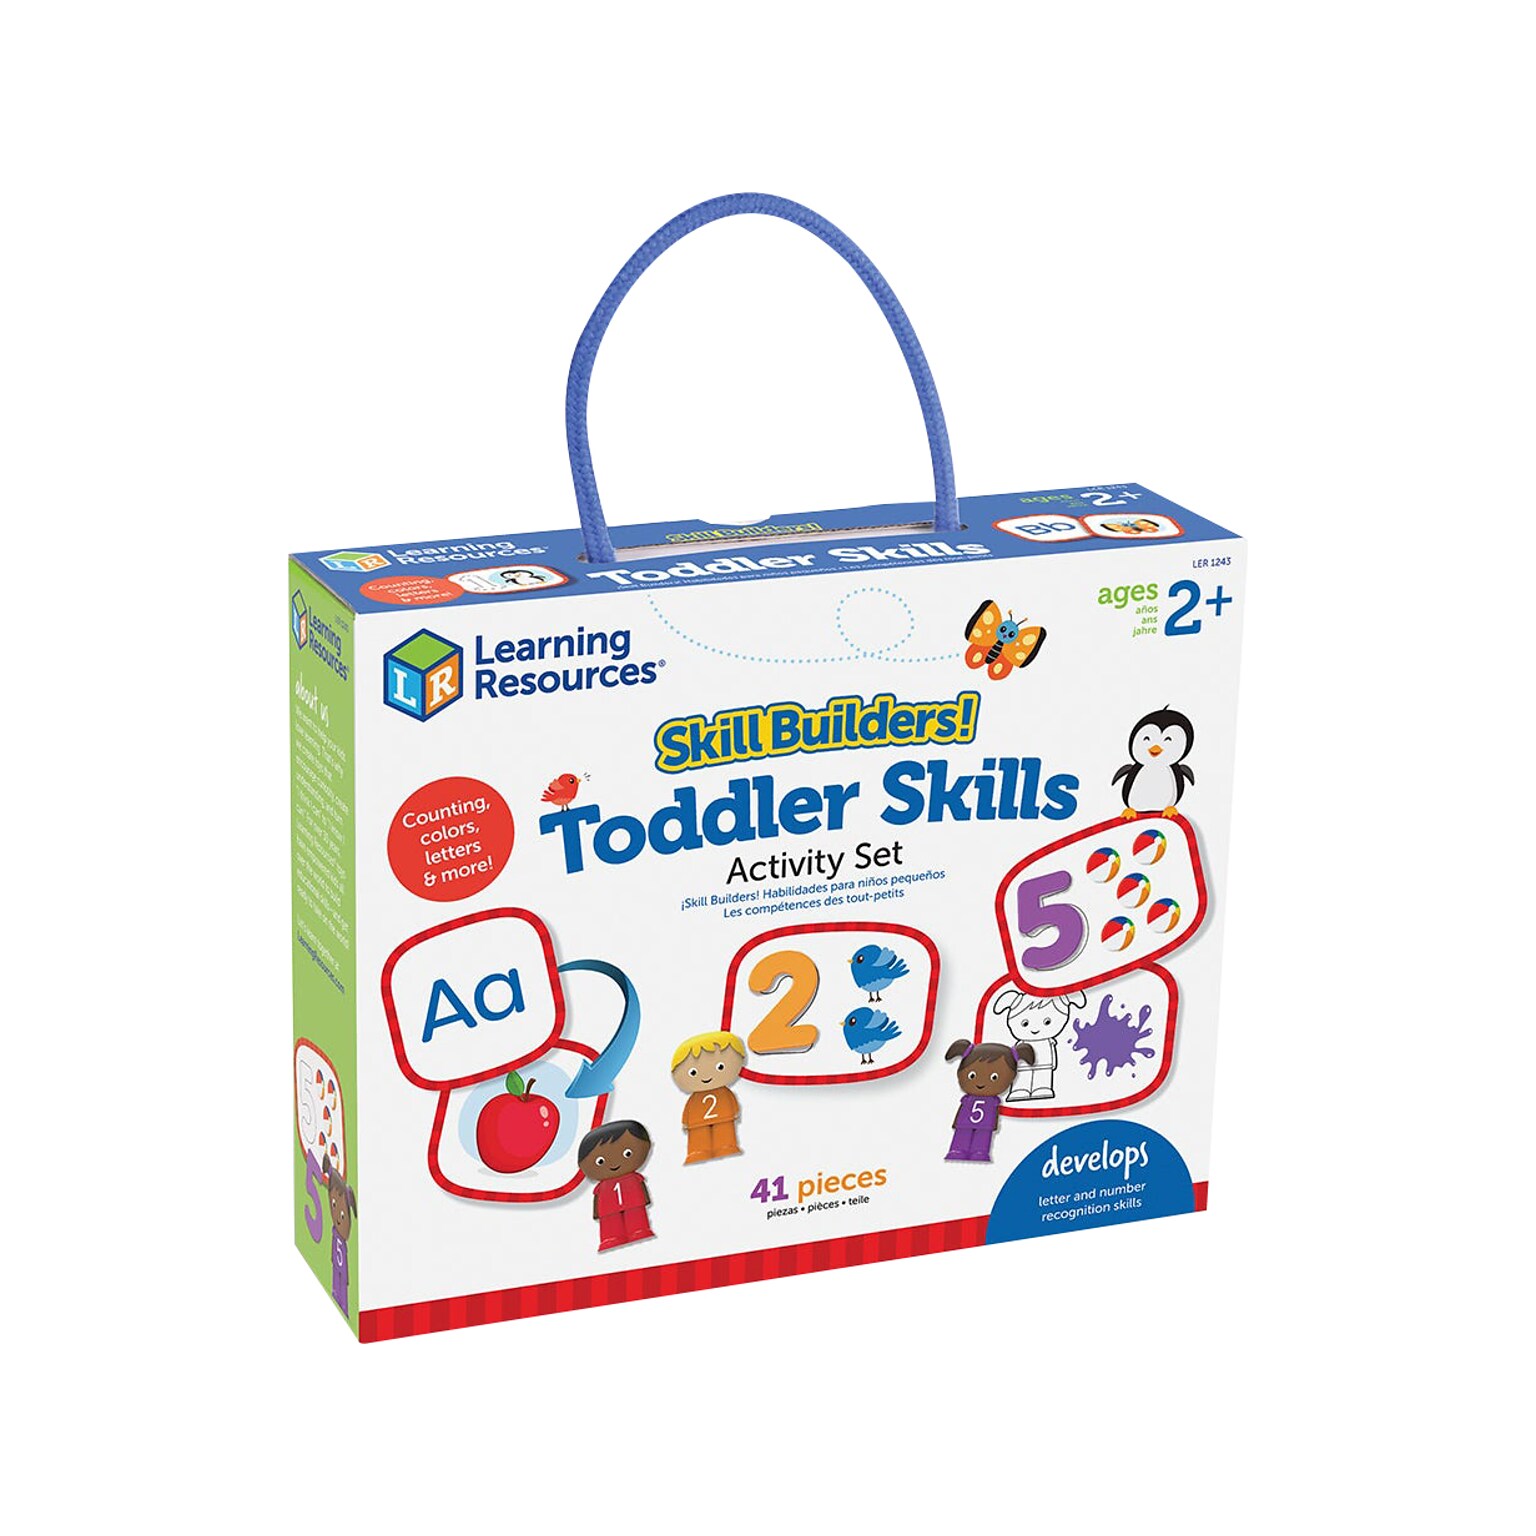 Learning Resources Skill Builders! Toddler Skills, Multicolor (LER1243)